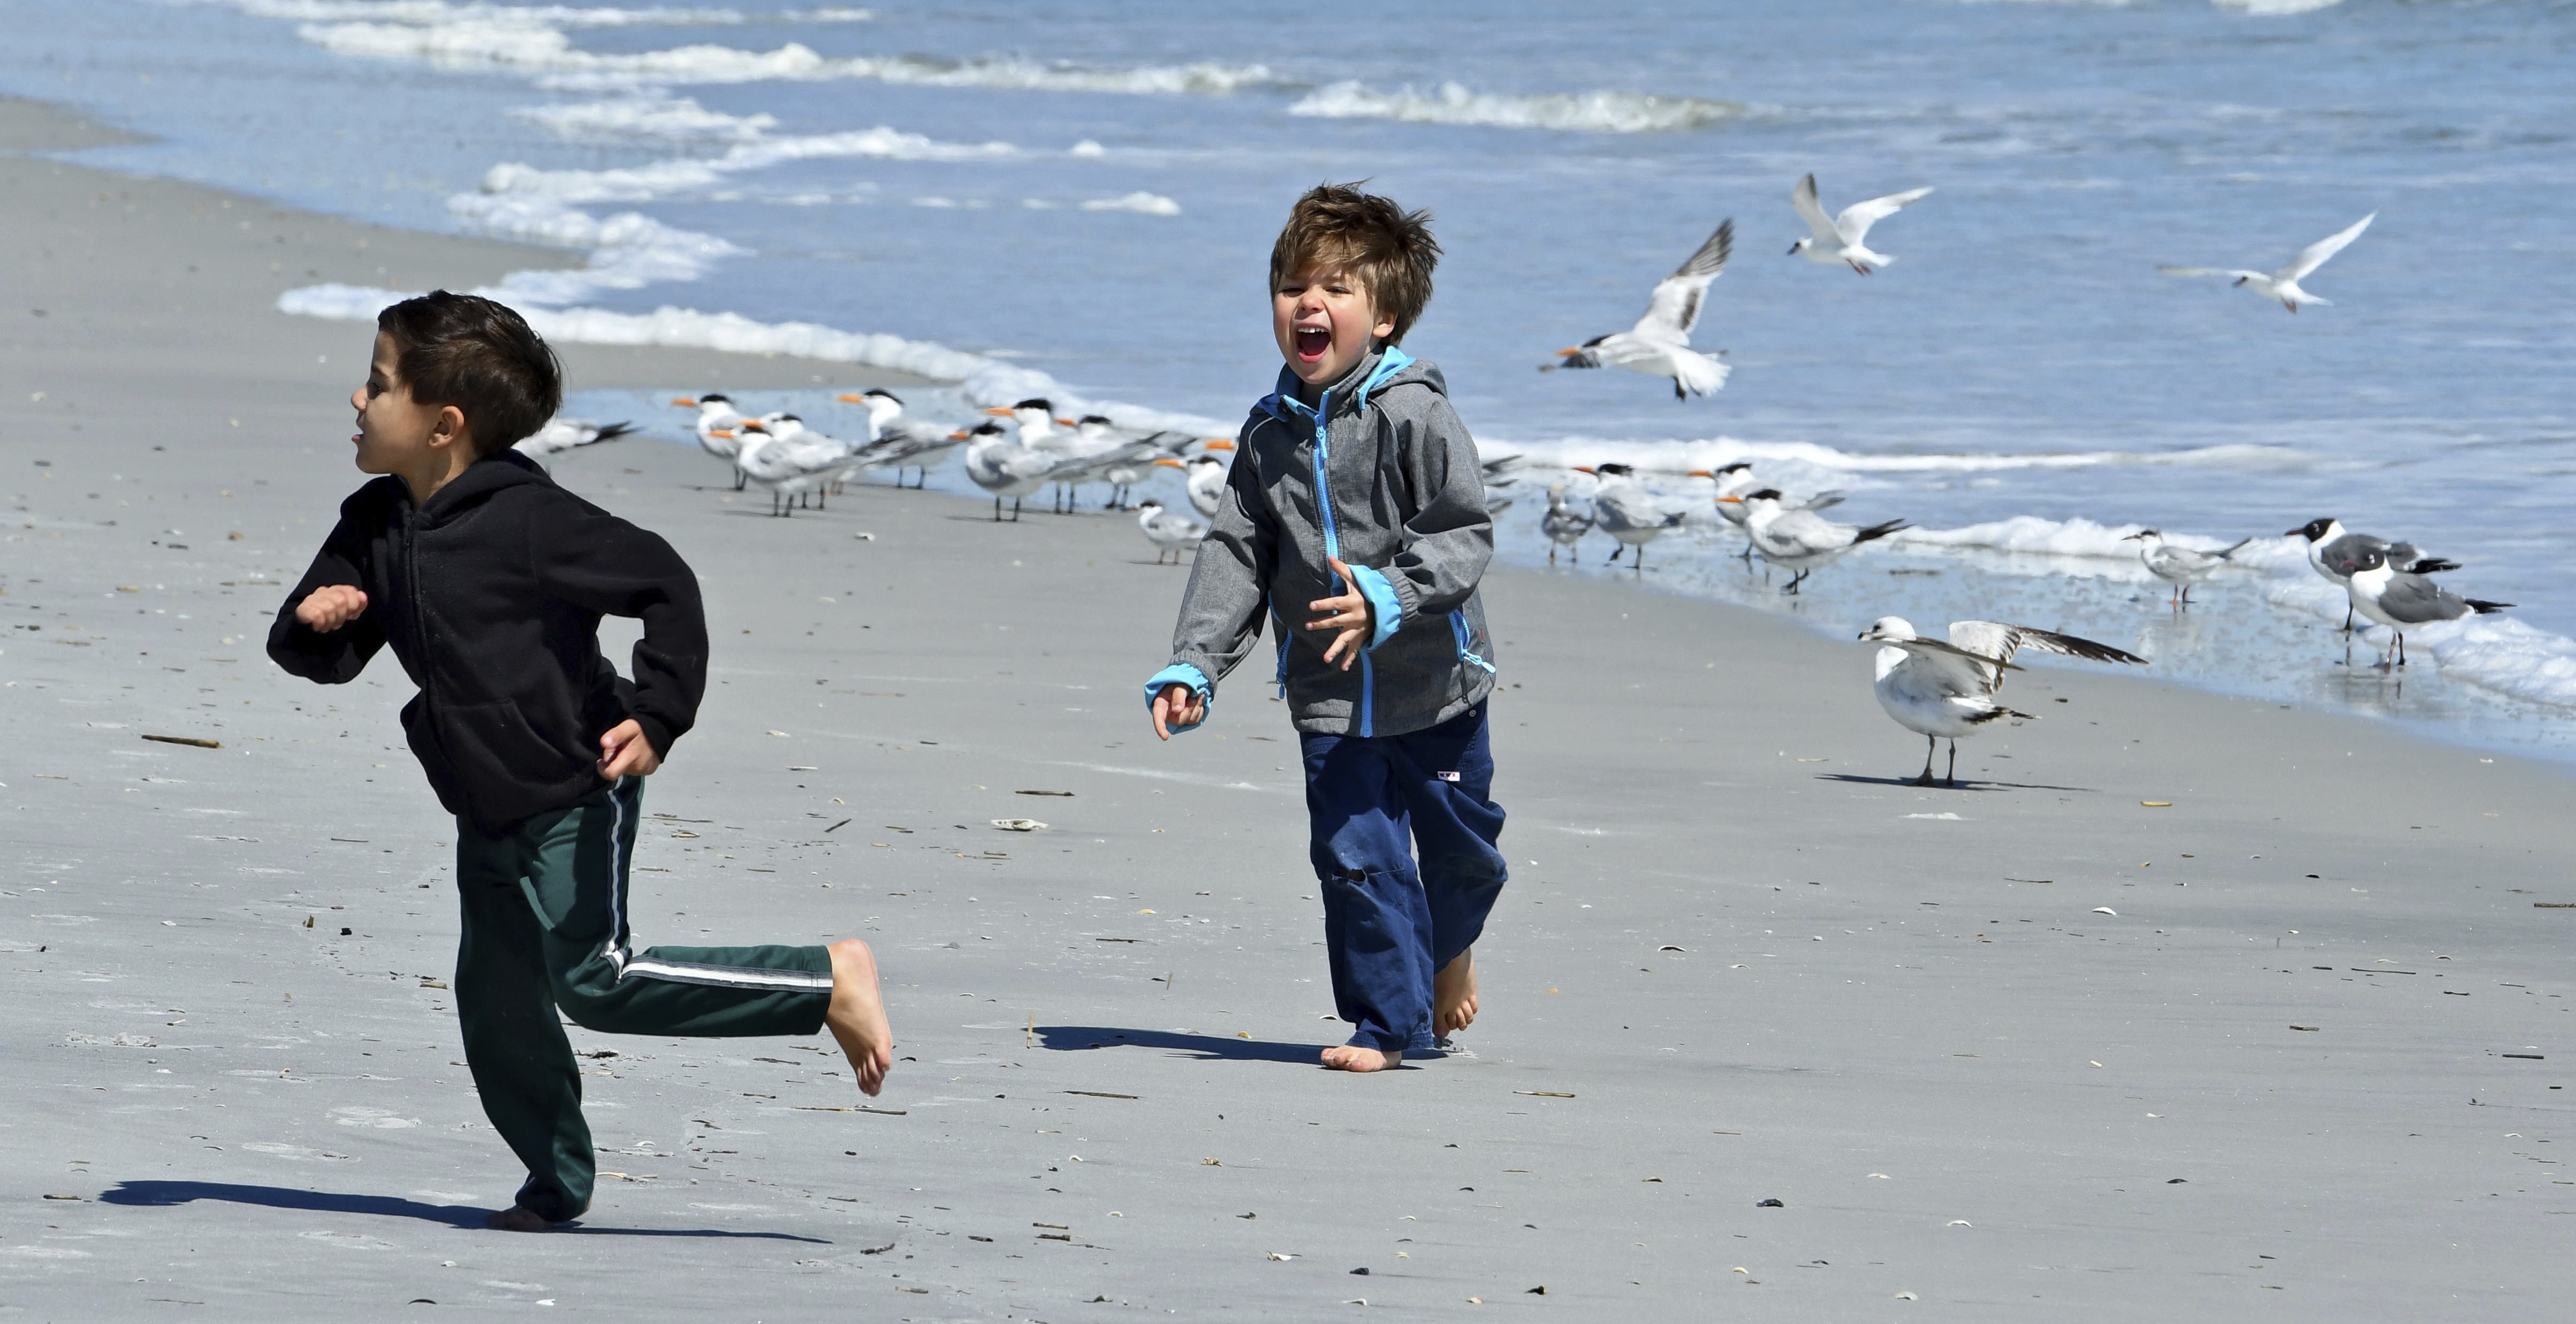 Local resident Marco, 5, (from left) and his cousin Lucas, 5, visiting from his home in Finland run away after teasing a flock of sea birds into flying on Atlantic Beach, FL. On Wednesday March 15, 2017 the threat of a possible hard freeze overnight in the Jacksonville, FL  brought firewood sales, shelter preparation and even a few folks who took advantage of the sunshine to play on Atlantic Beach filled the day as people prepared for the cold in their own way.  (Bob Mack/Florida Times-Union via AP)